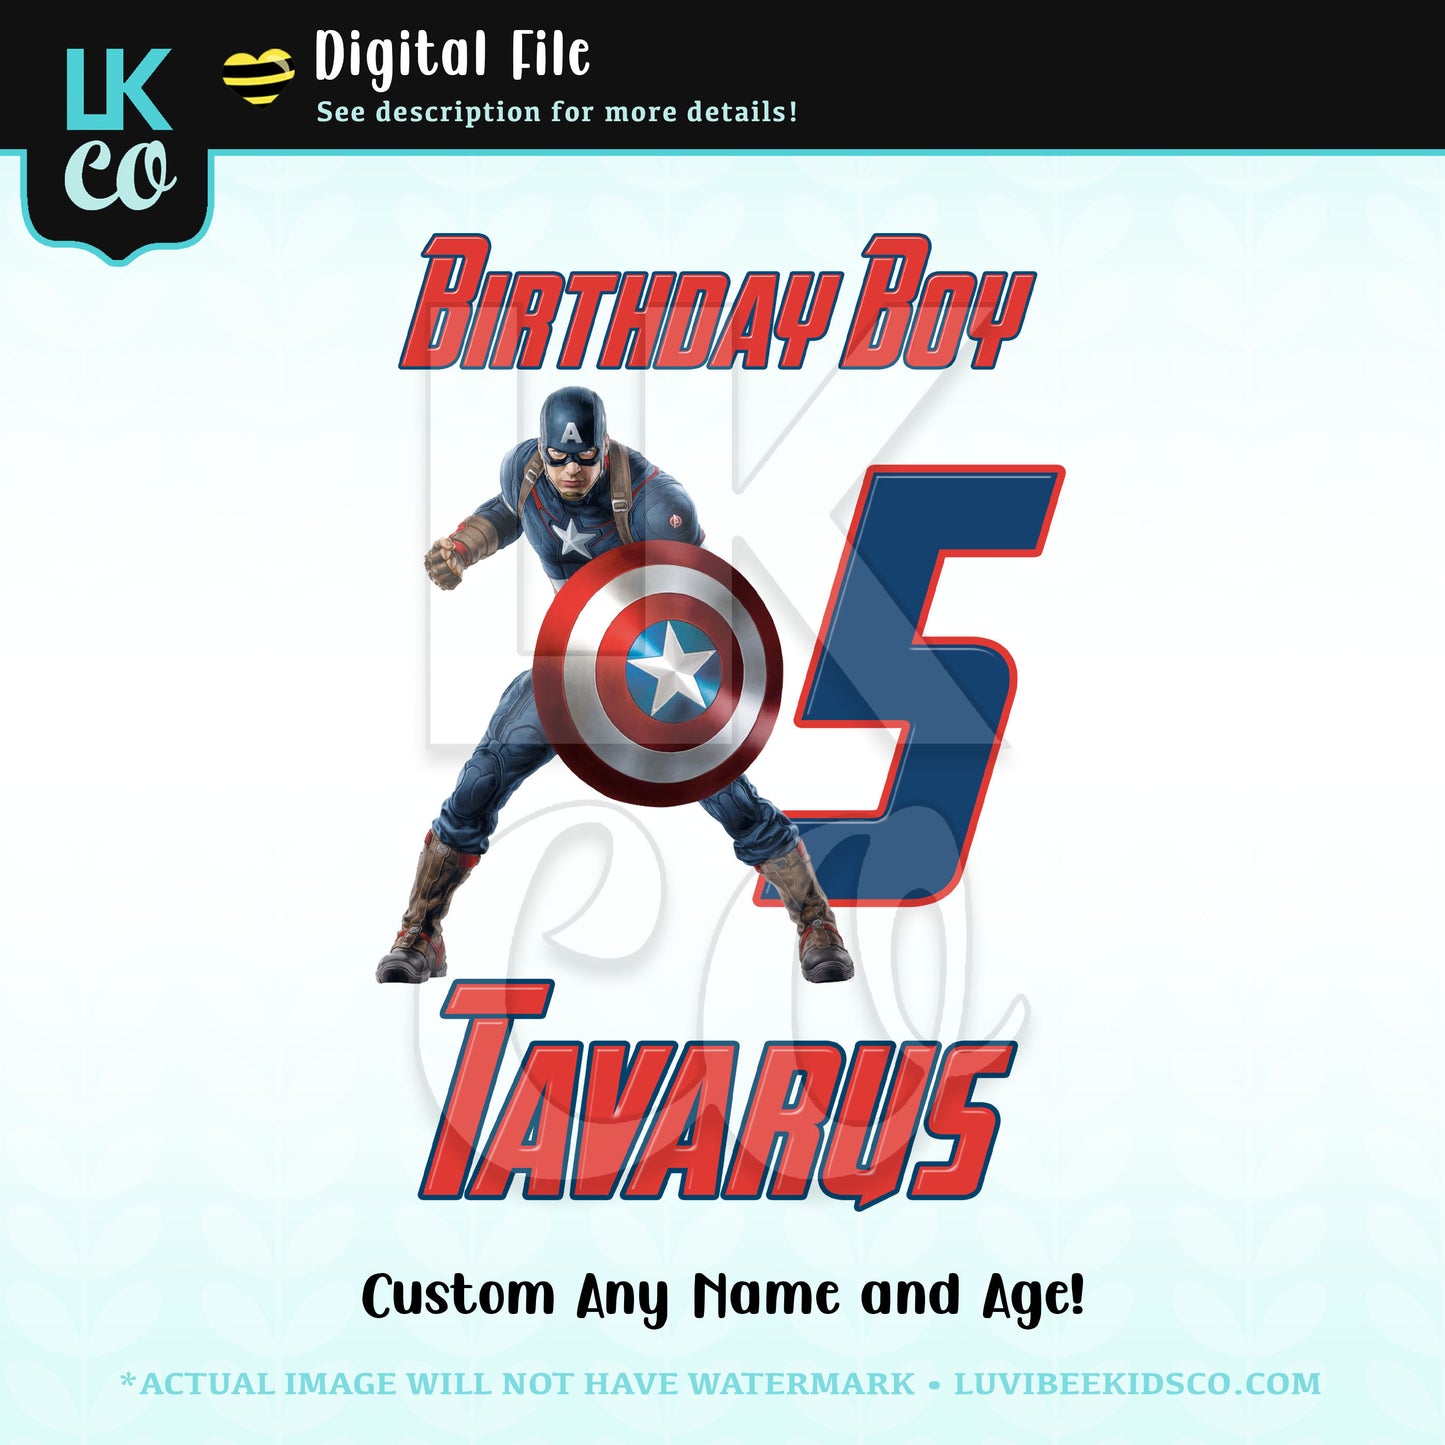 Captain America Digital File [12-24hr email] for Birthday and Events - Birthday Boy - Any Name and Age